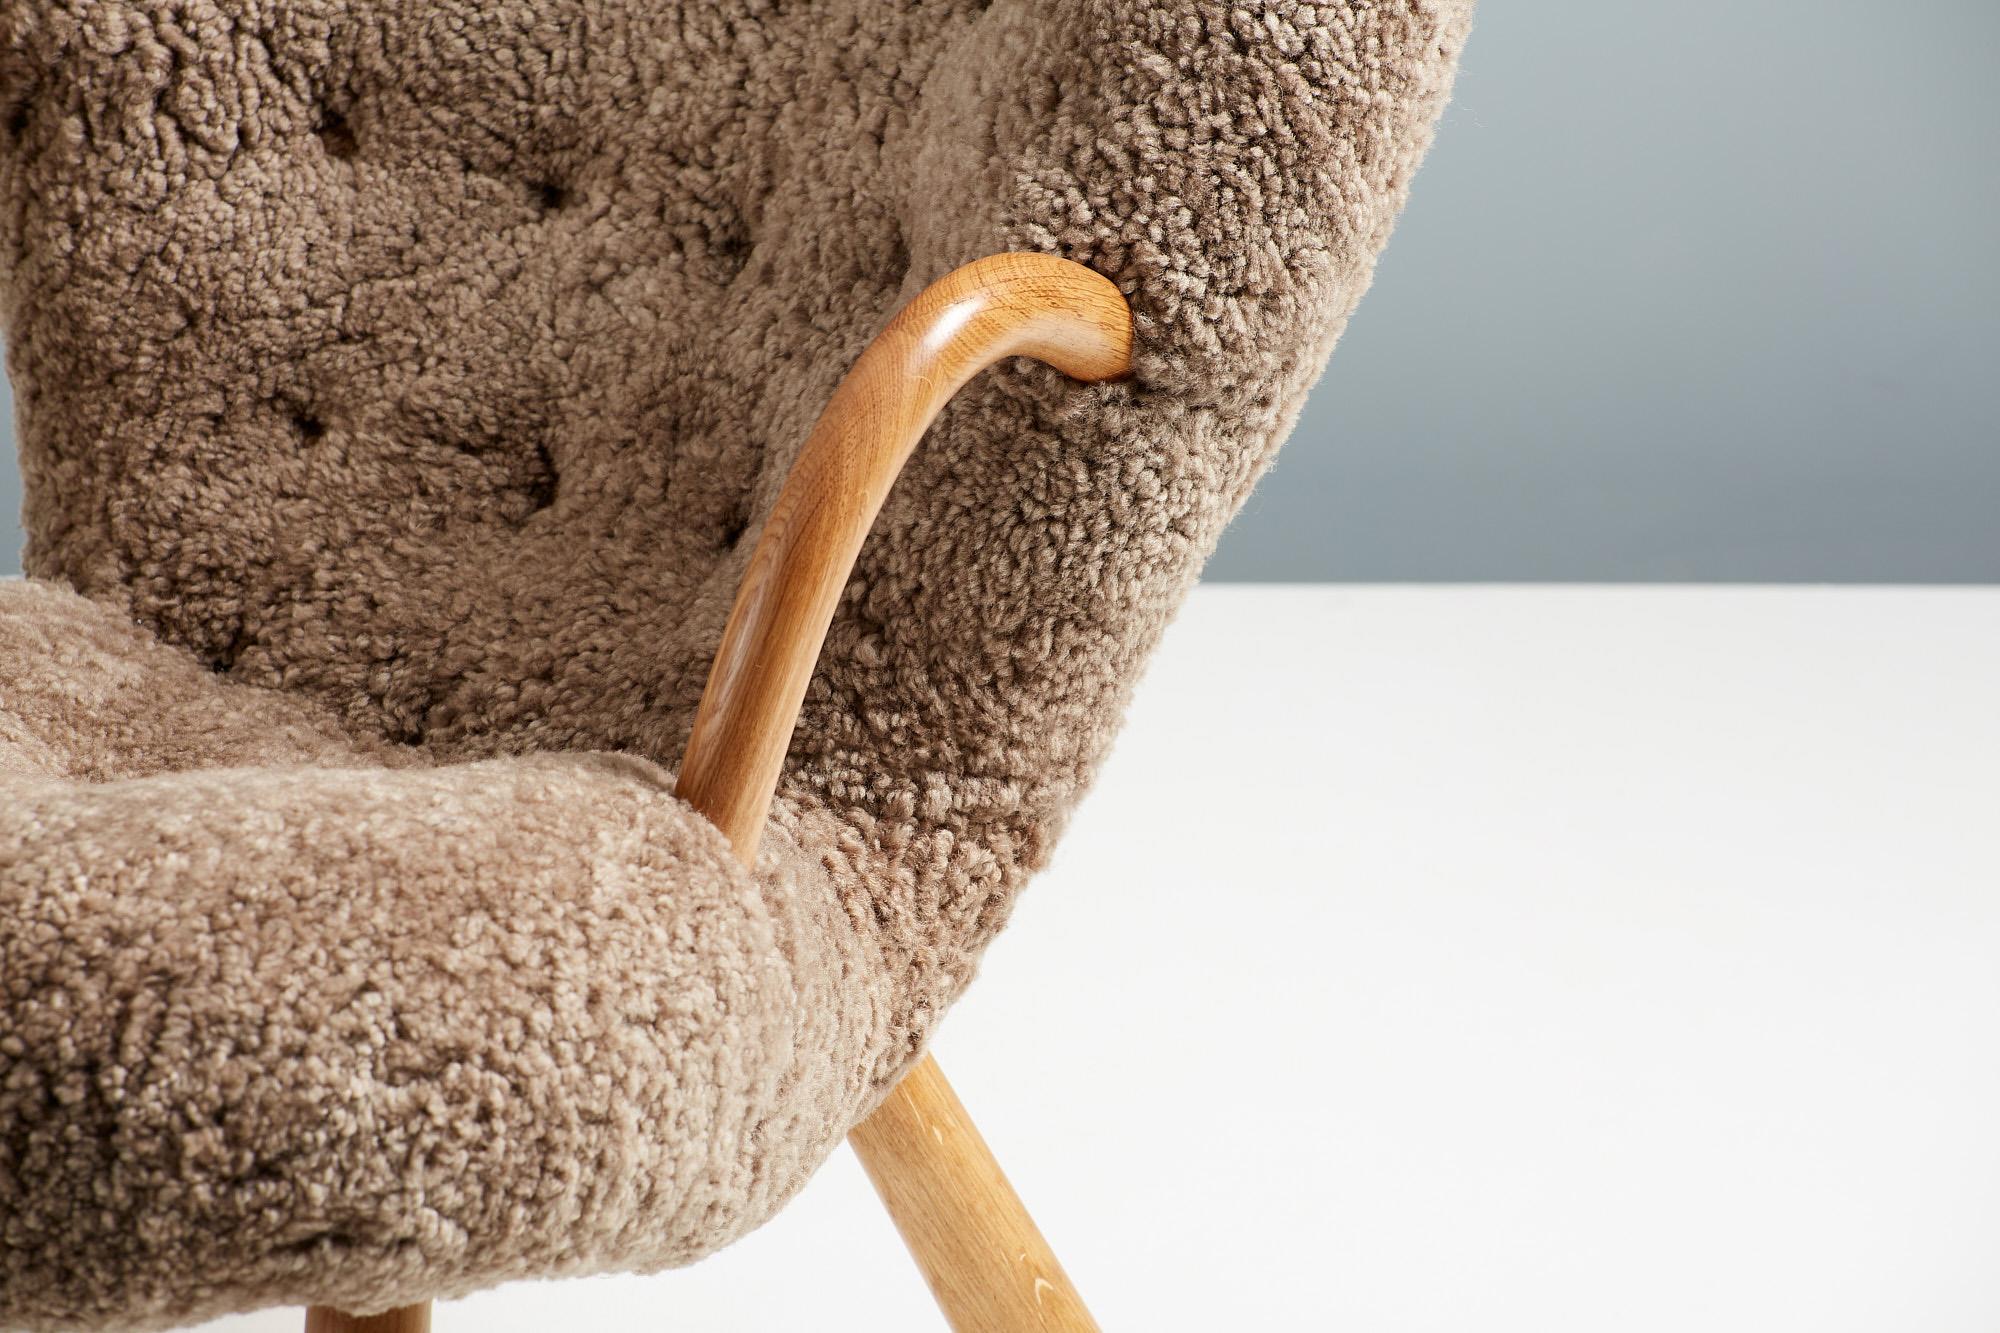 Re-Edition Sheepskin Clam Chair by Arnold Madsen 1